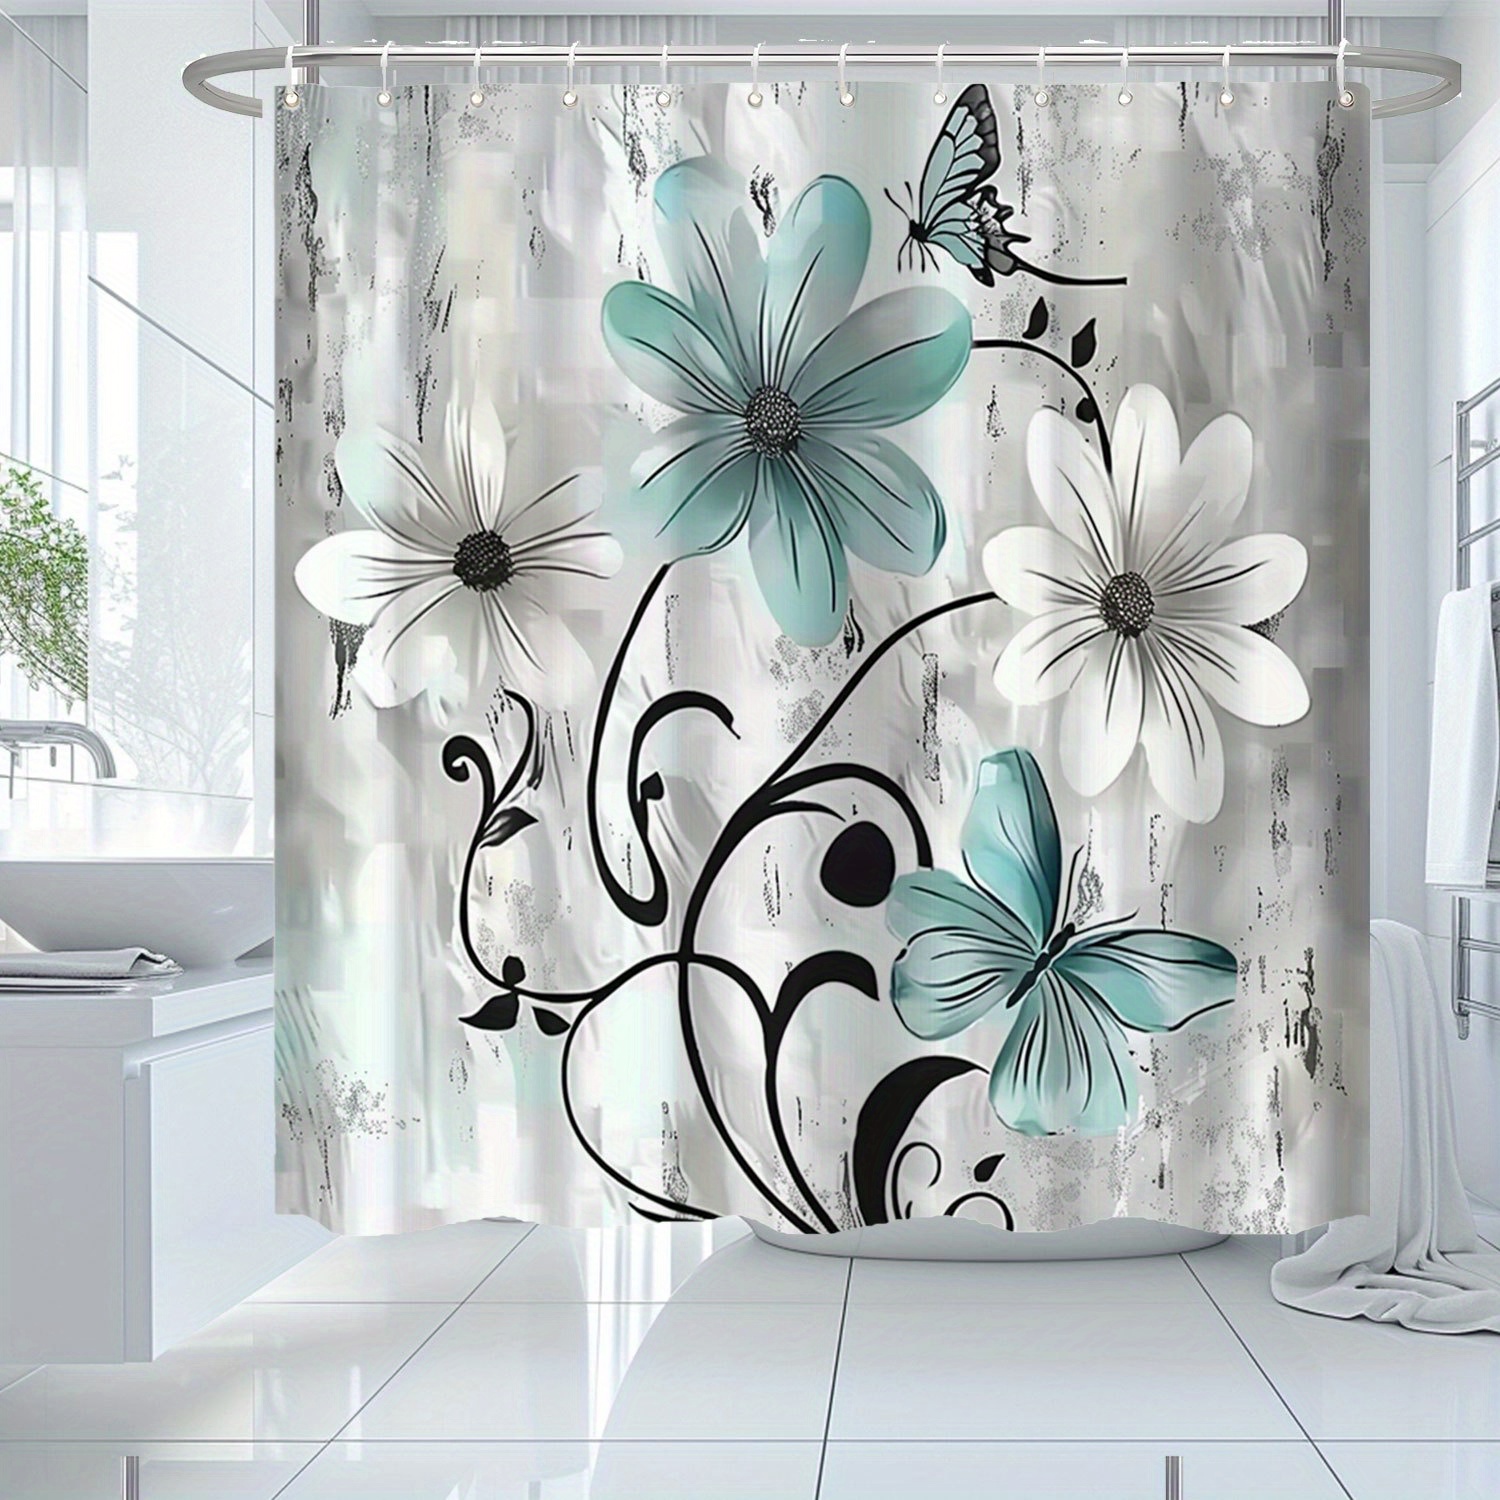 

Waterproof Polyester Shower Curtain With Butterfly And Flower Pattern, Mildew Resistant, 71x71 Inches, Includes 12 Hooks, Machine Washable, No , Woven Bathroom Decor With Elegant Arts Theme